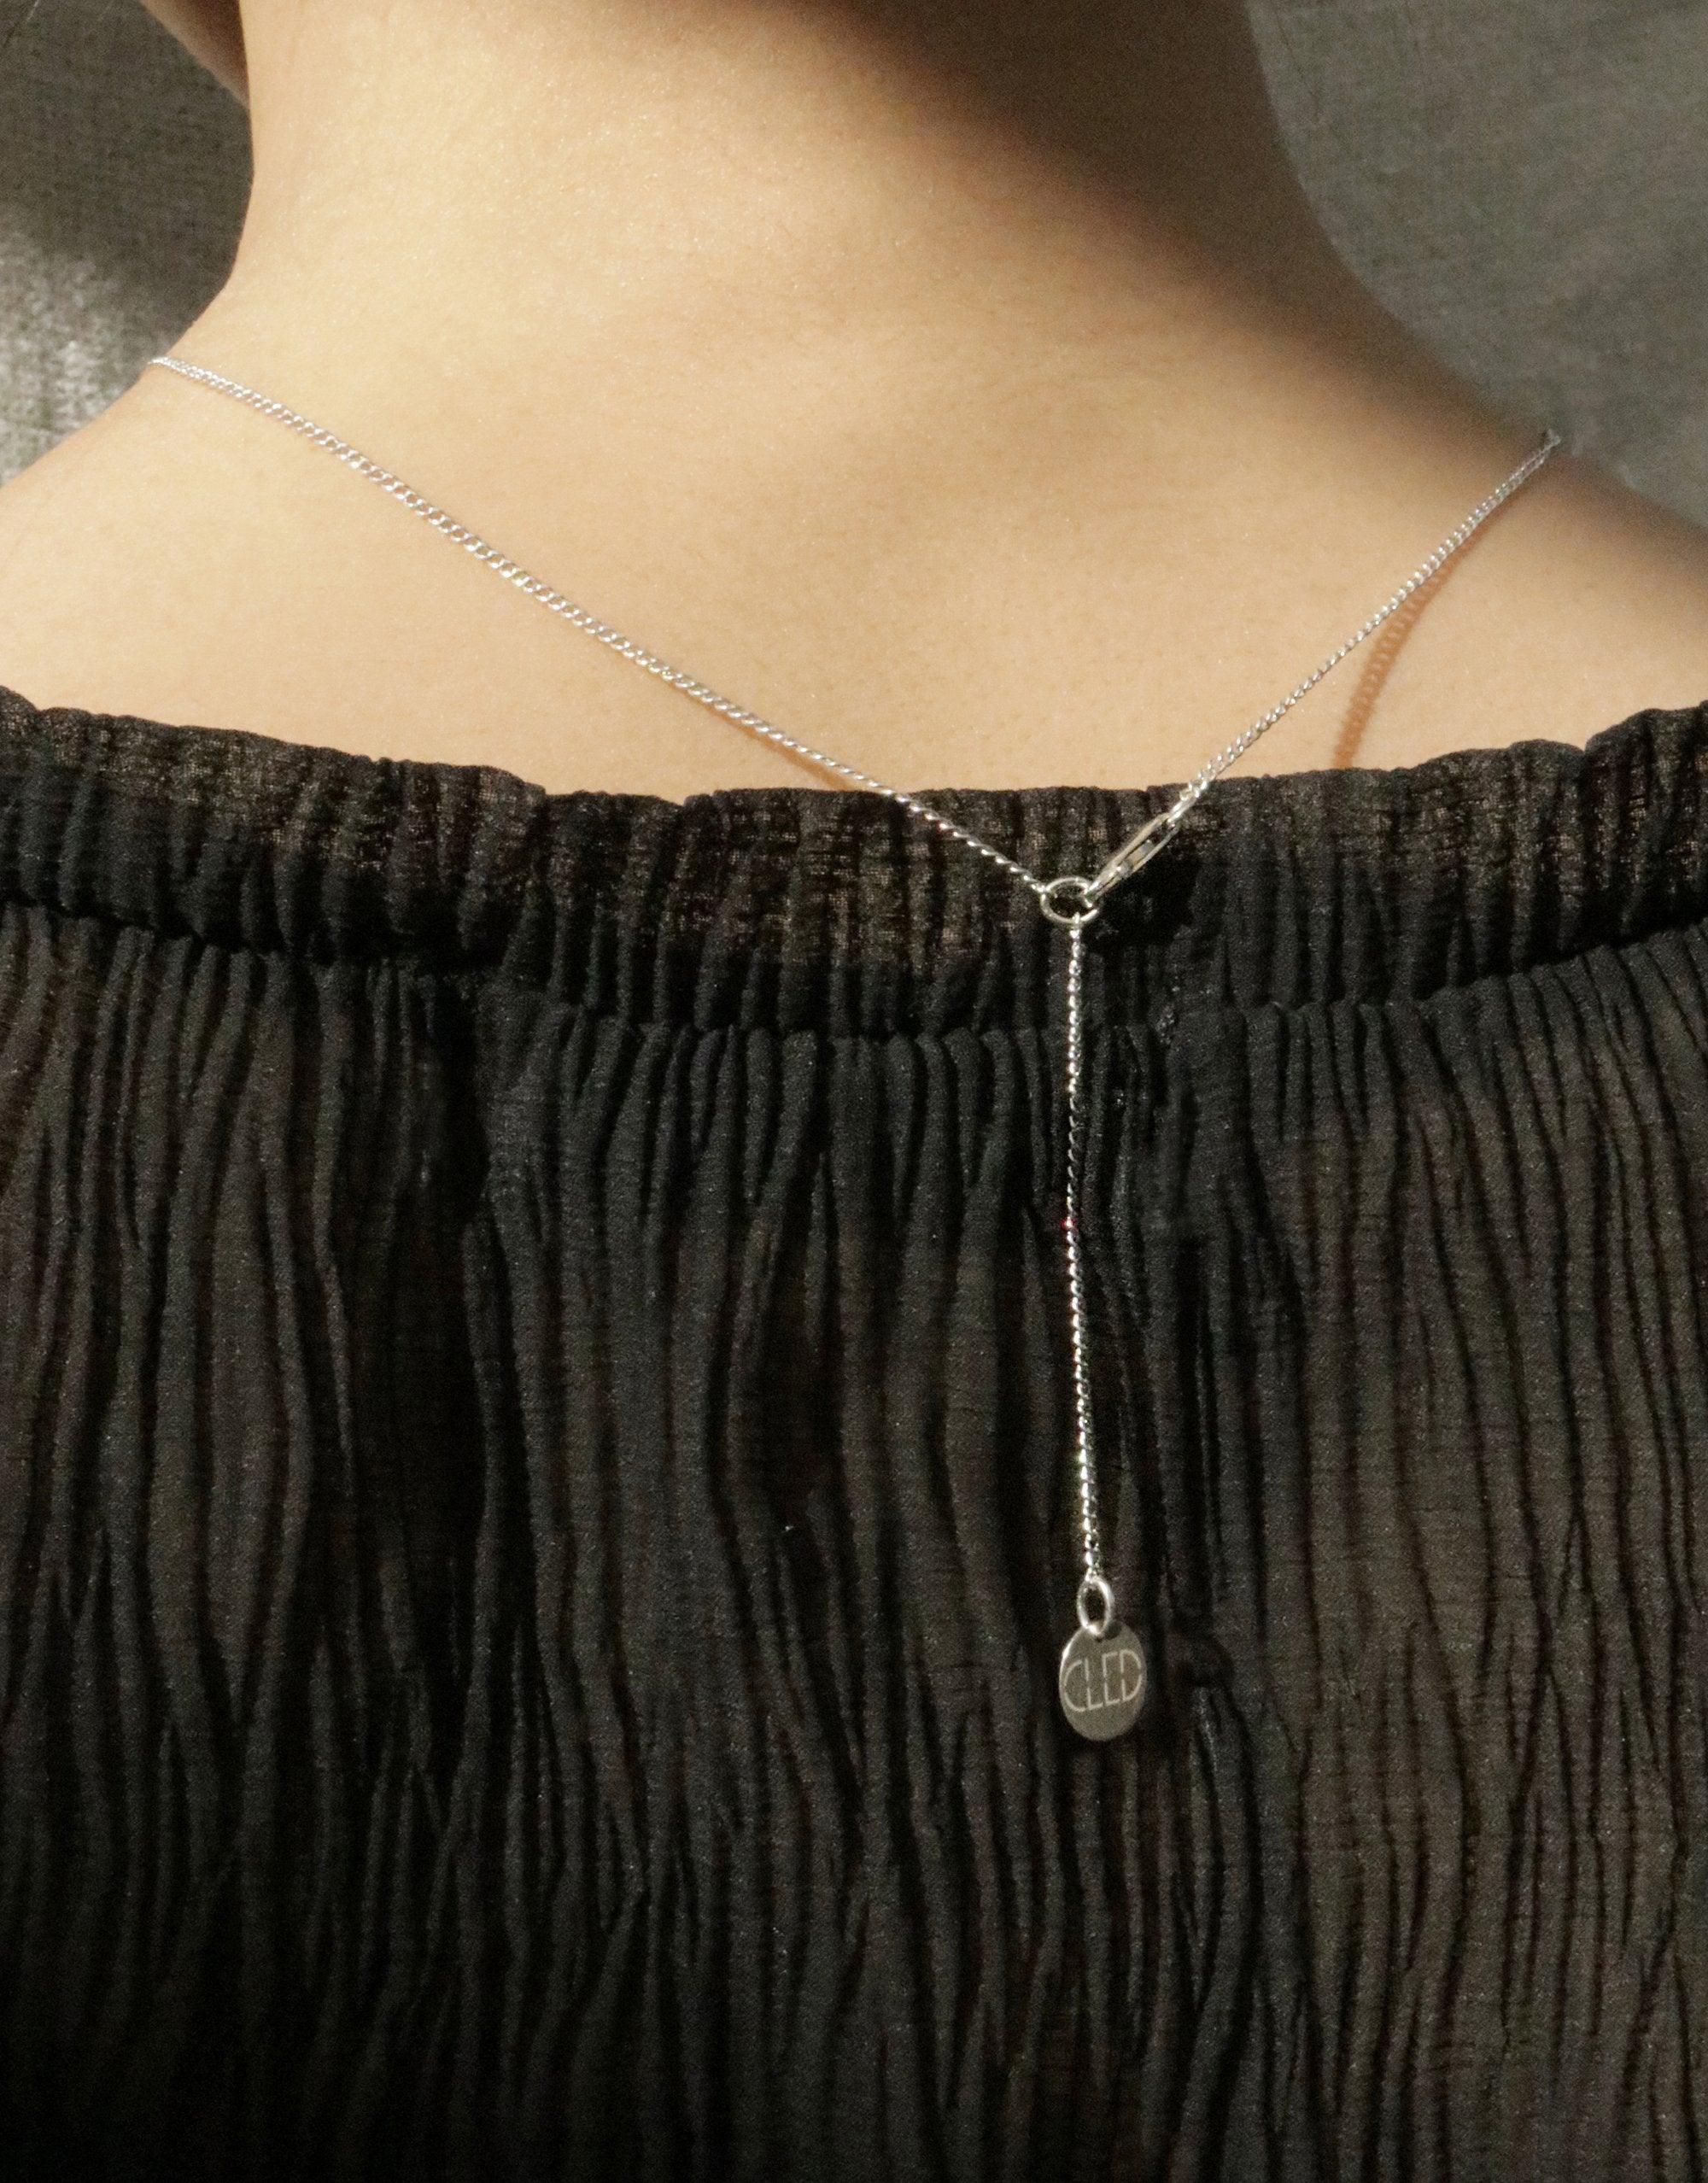 CLED In The Loop Necklace 14